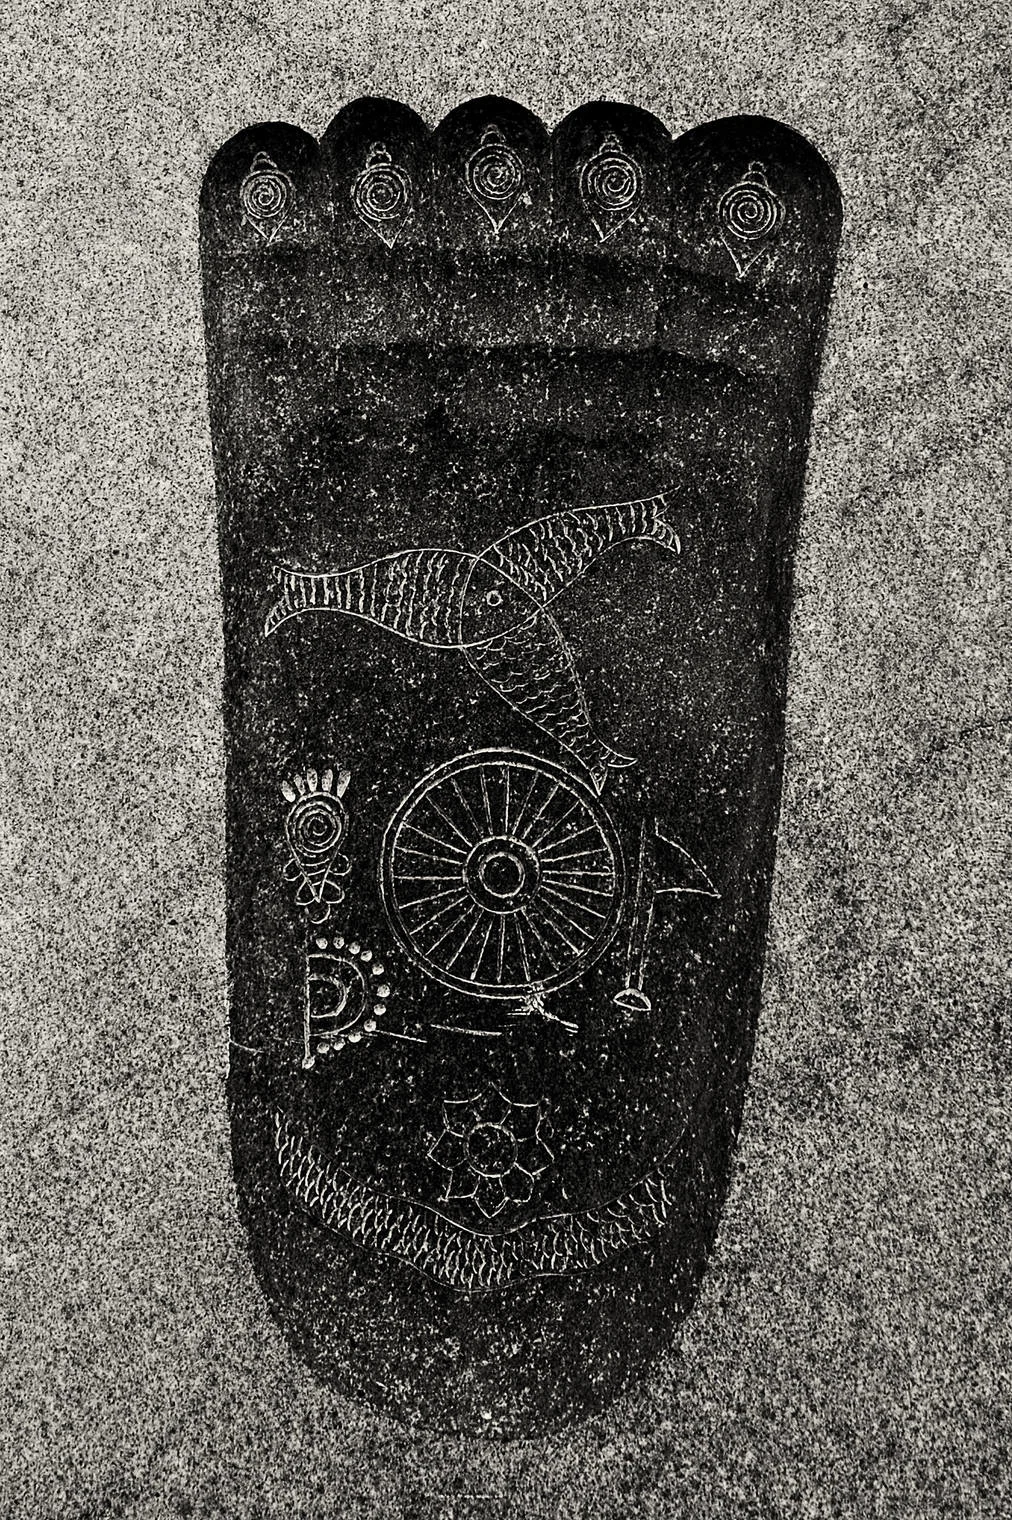 footstep of buddha carved in granite